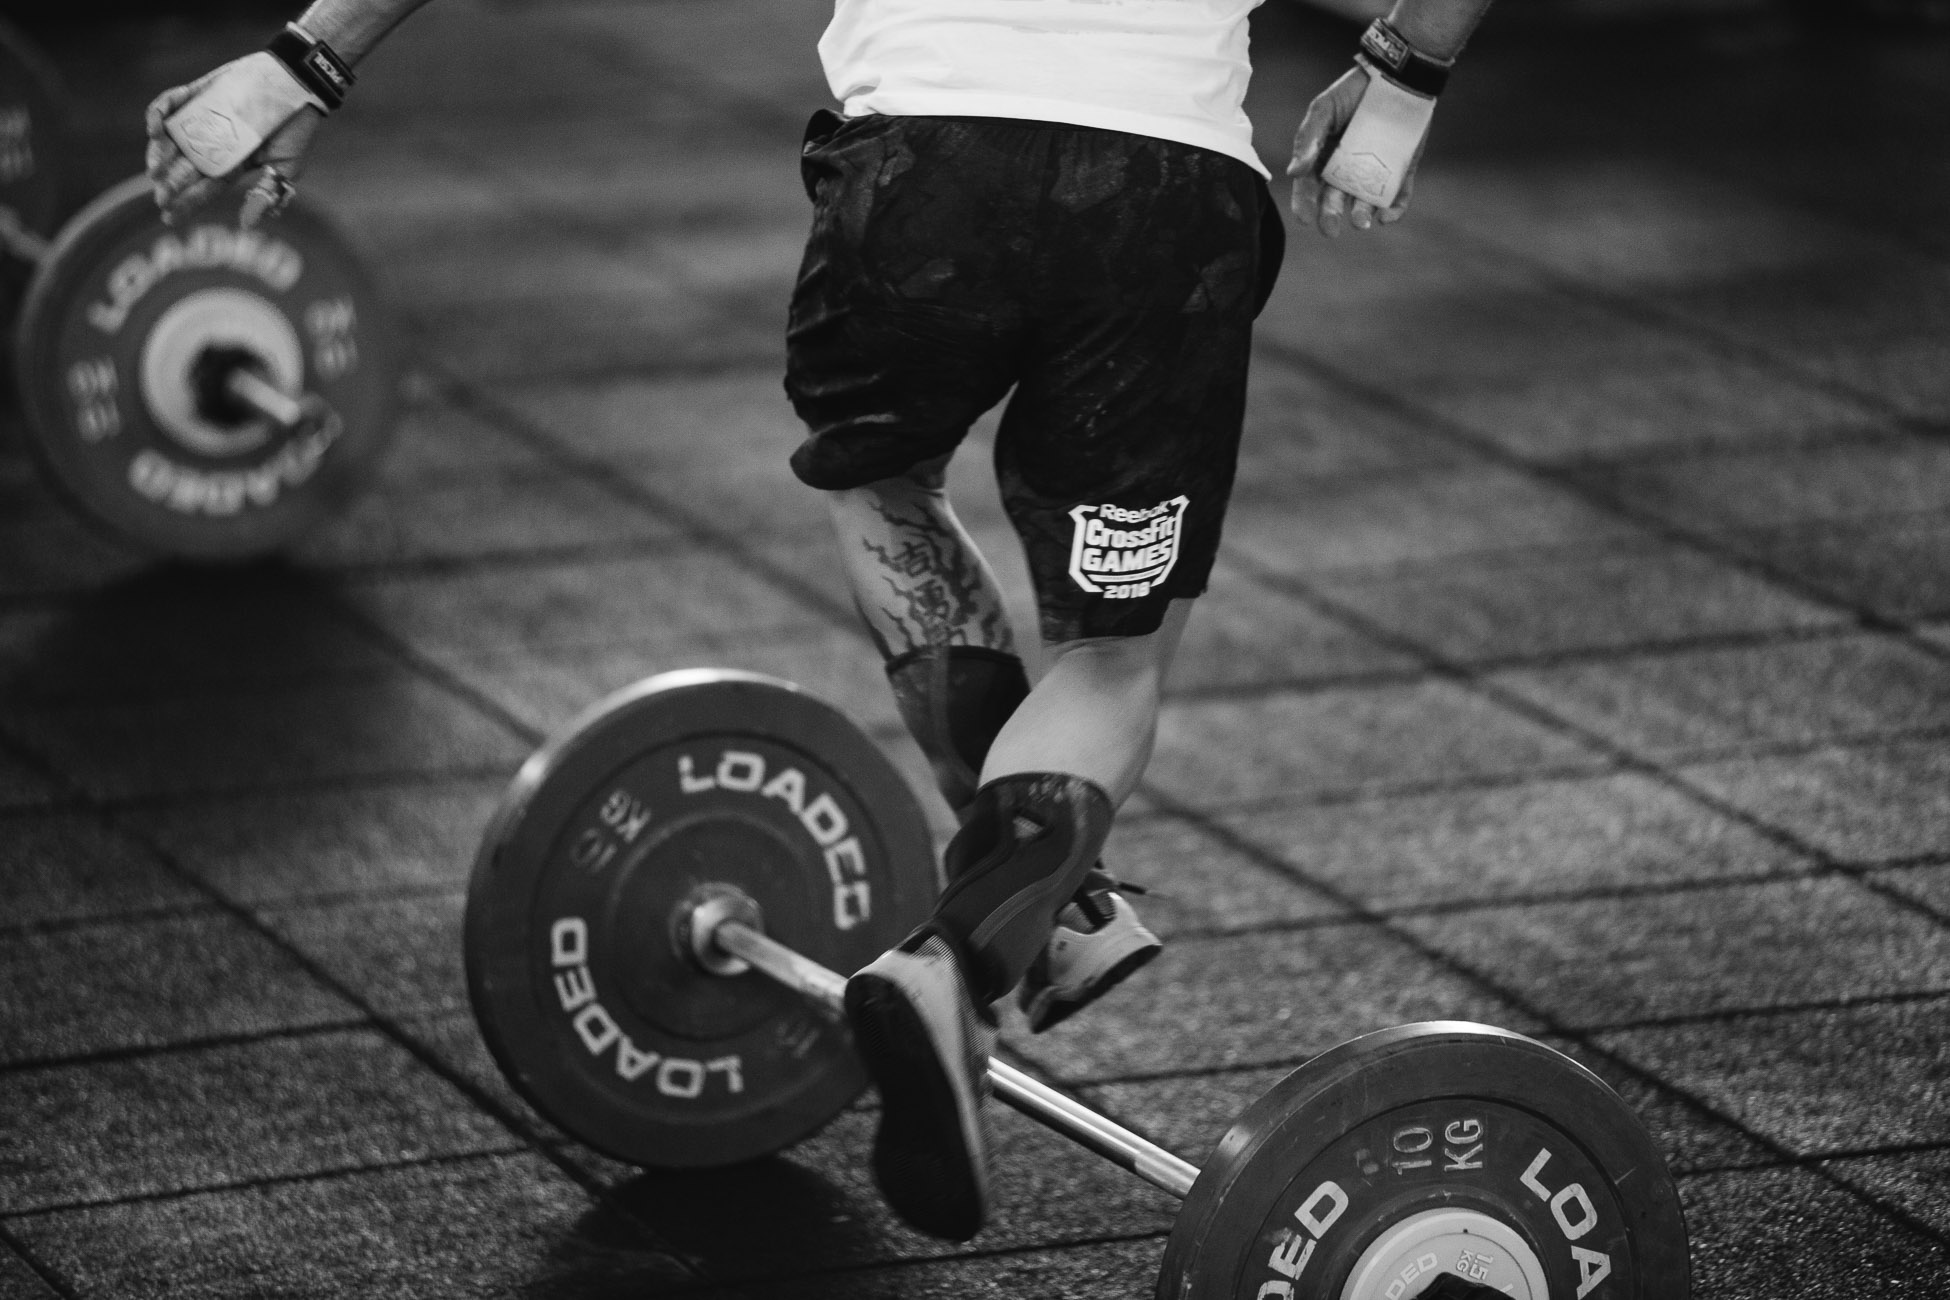 crossfit-games-open-fitness-athlete-photography-002.jpg